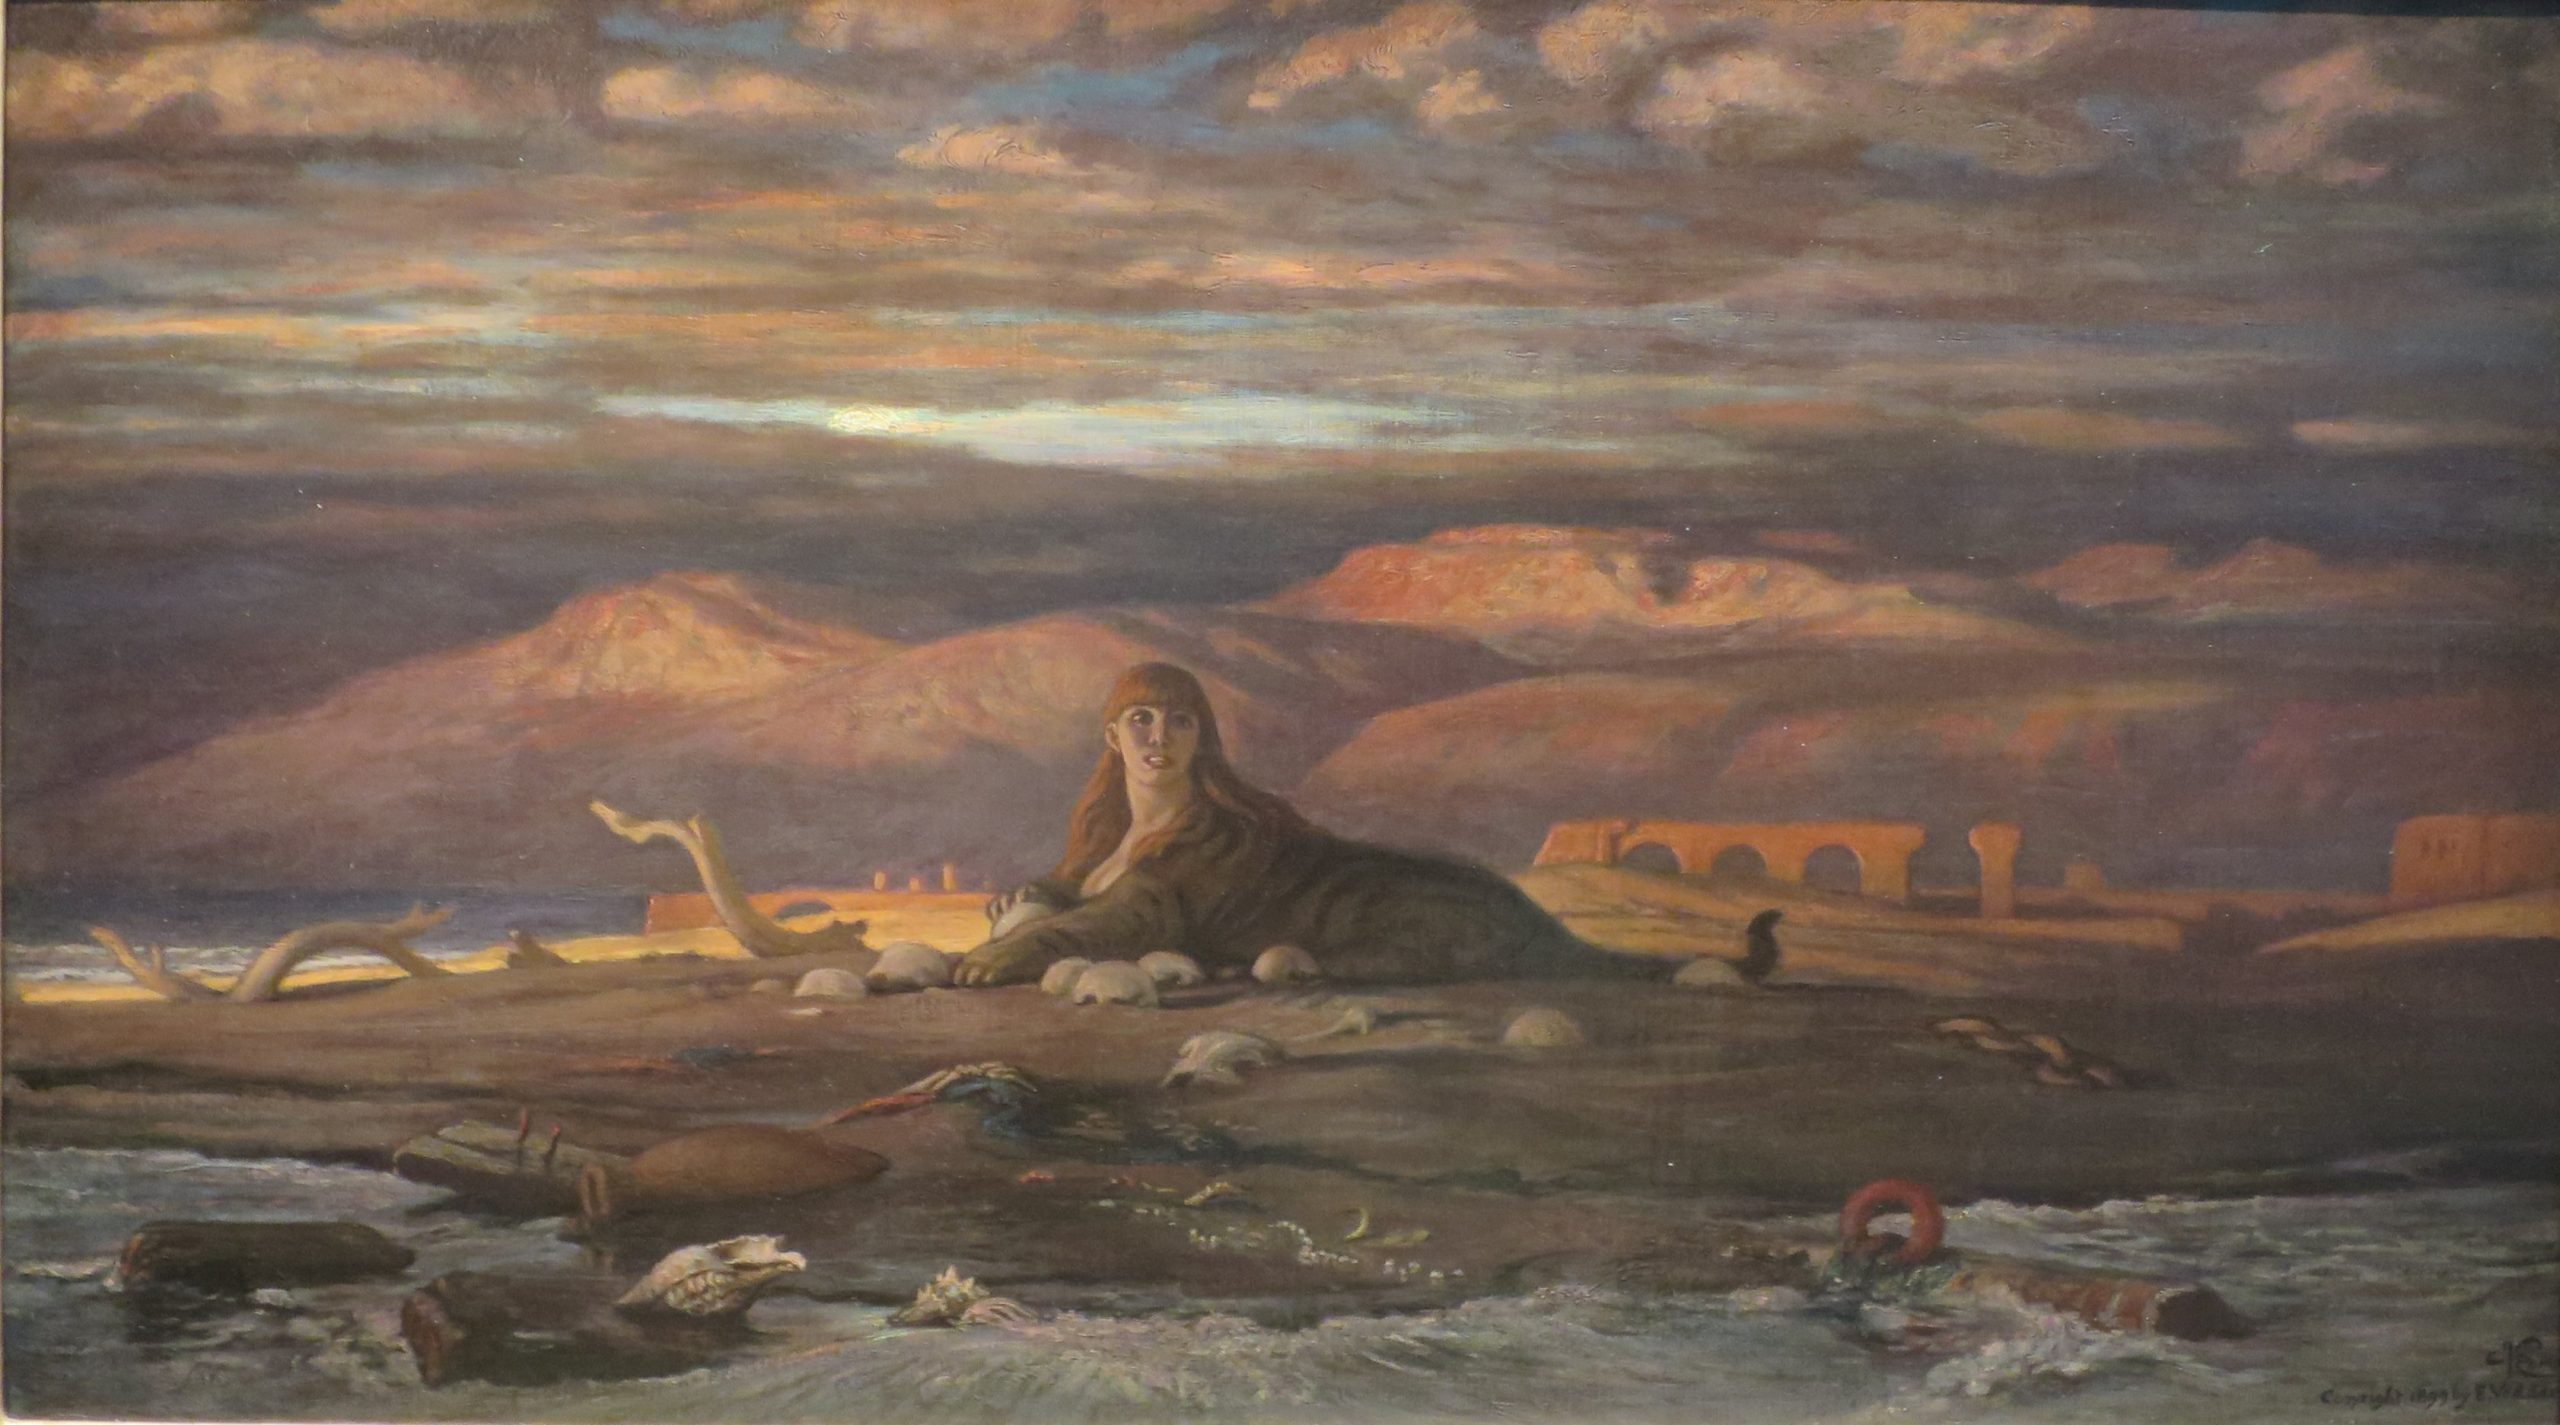 A creature with the head of a woman and the body of a tiger laying on the seashore